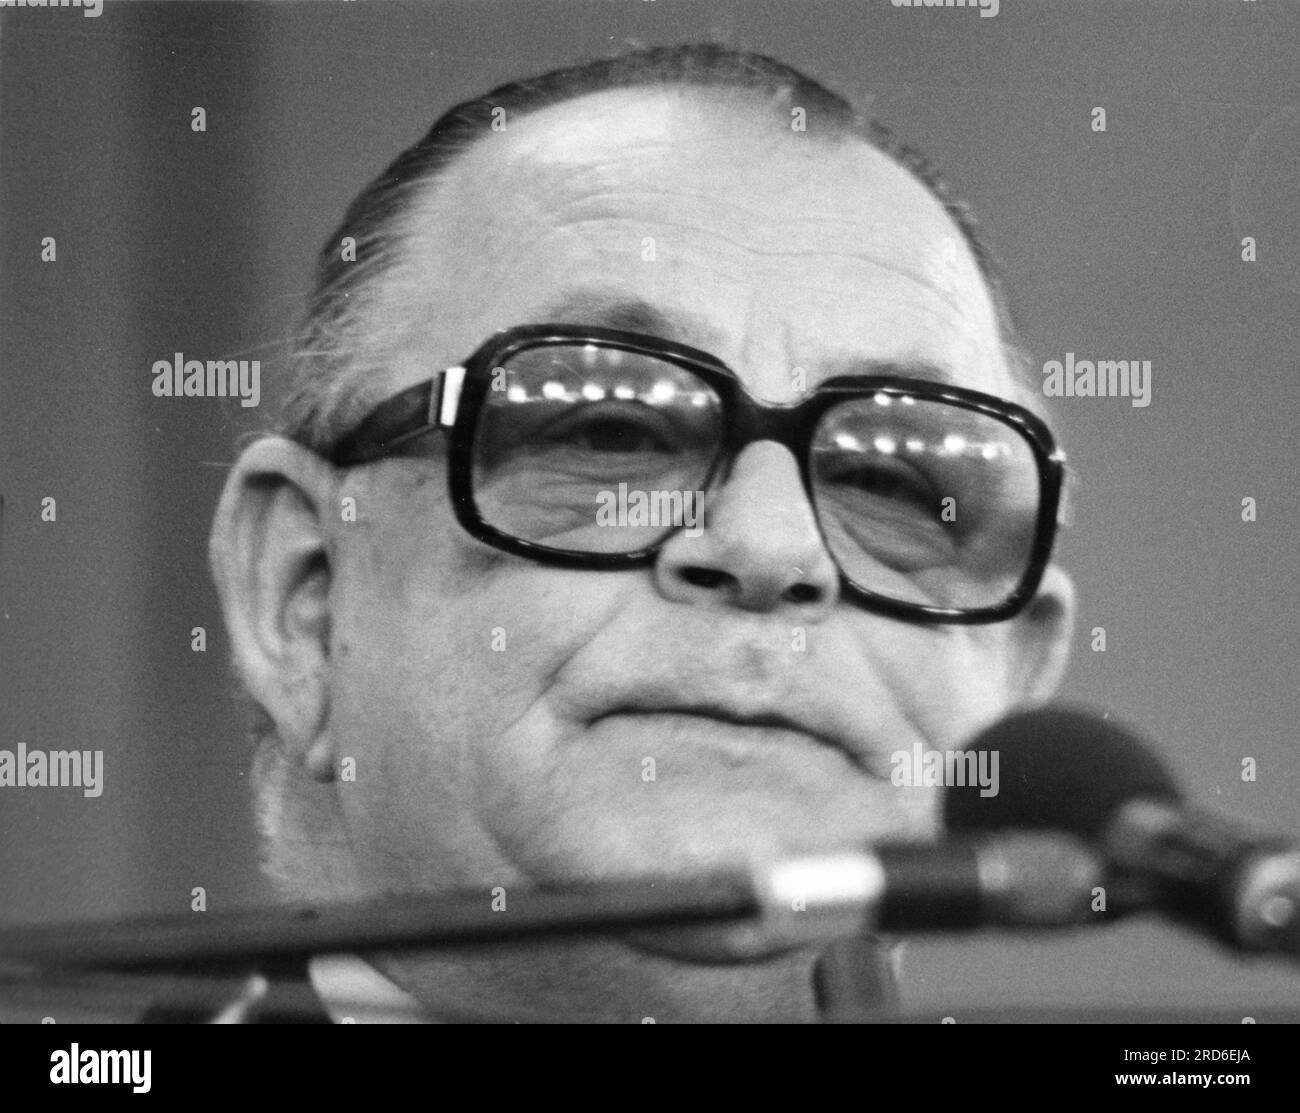 Wischnewski, Hans-Juergen, 24.7.1922 - 24.2.2005, German politician (SPD), ADDITIONAL-RIGHTS-CLEARANCE-INFO-NOT-AVAILABLE Stock Photo